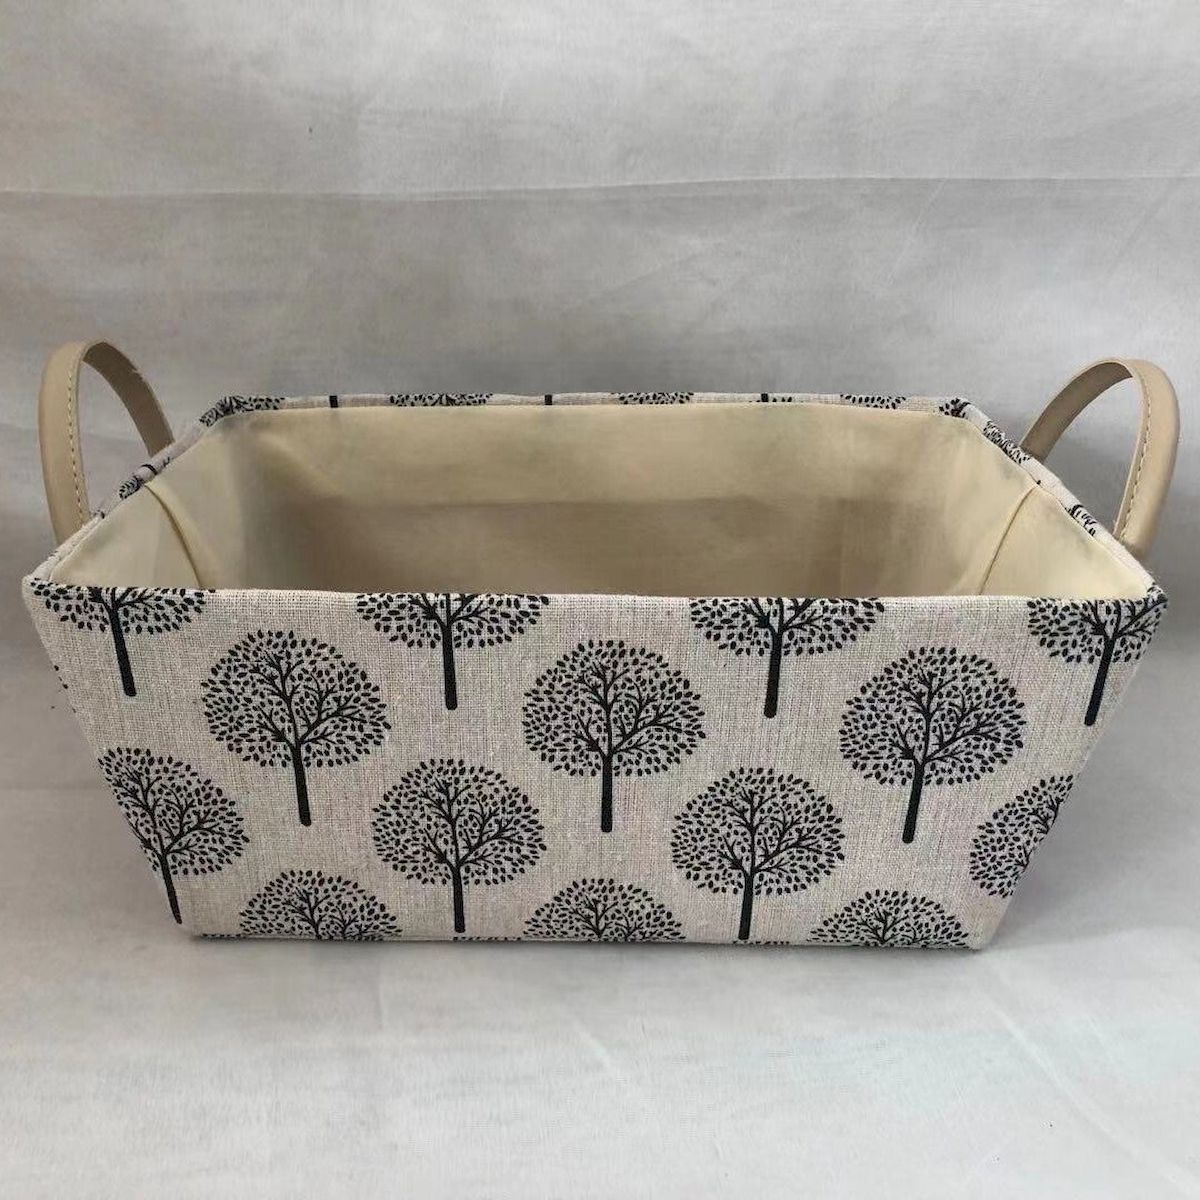 Picture of Mr. MJs Trading AI-2250-209 Cream with Black Tree Pattern & Faux Leather Handles Fabric Basket